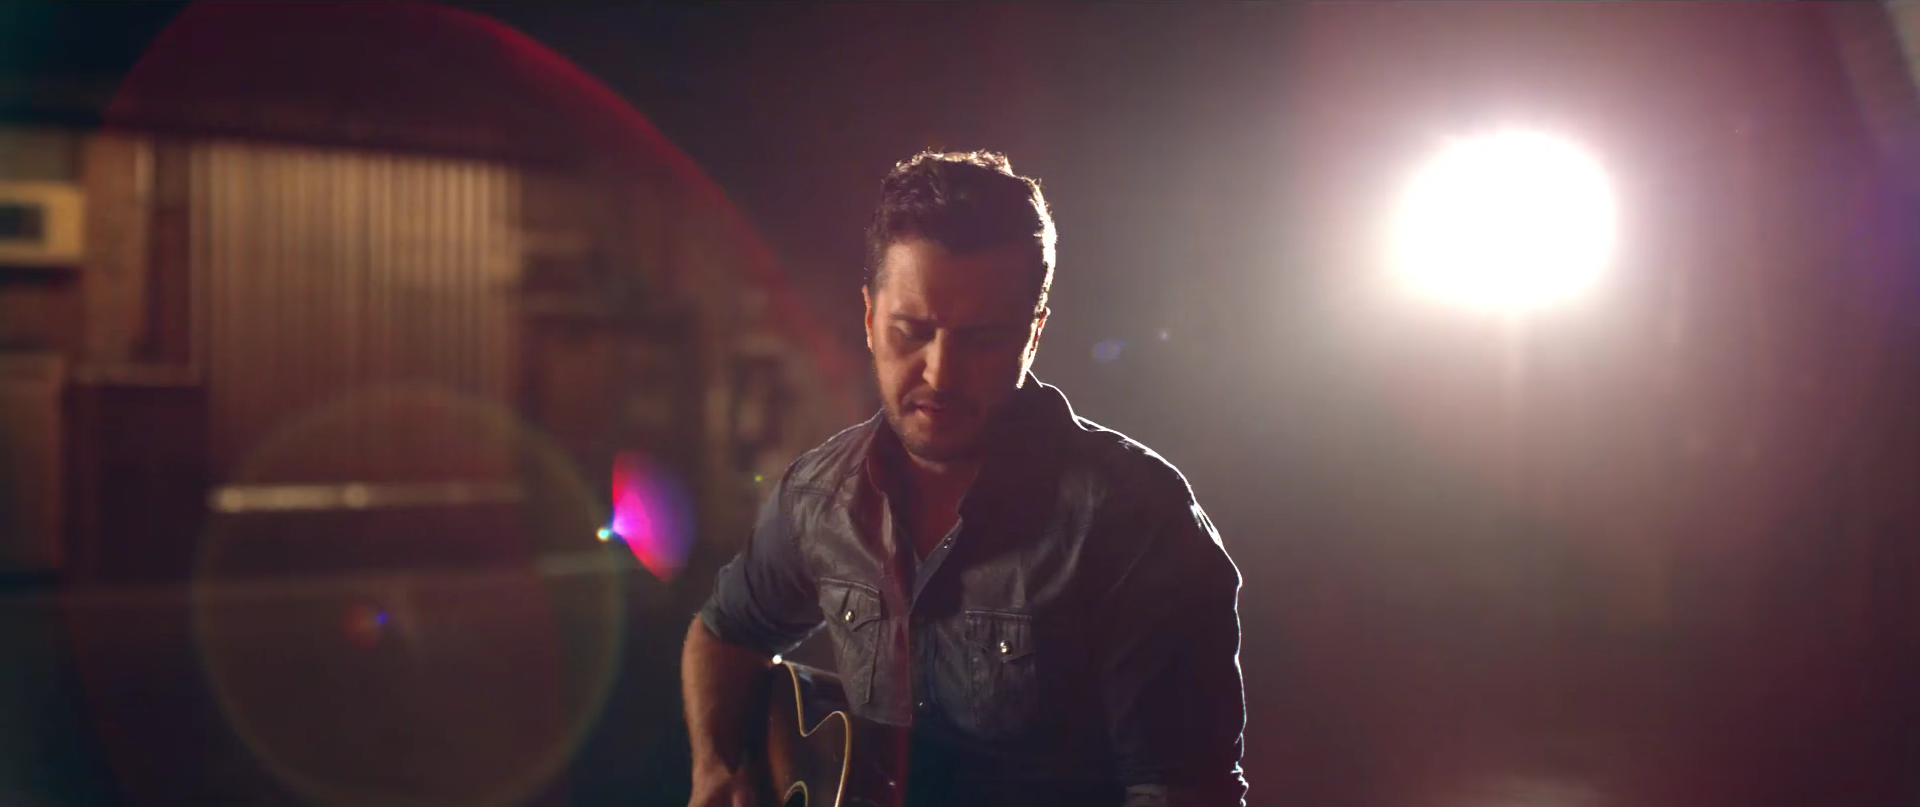 Luke Bryan Releases Personal New Music Video for “Fast”